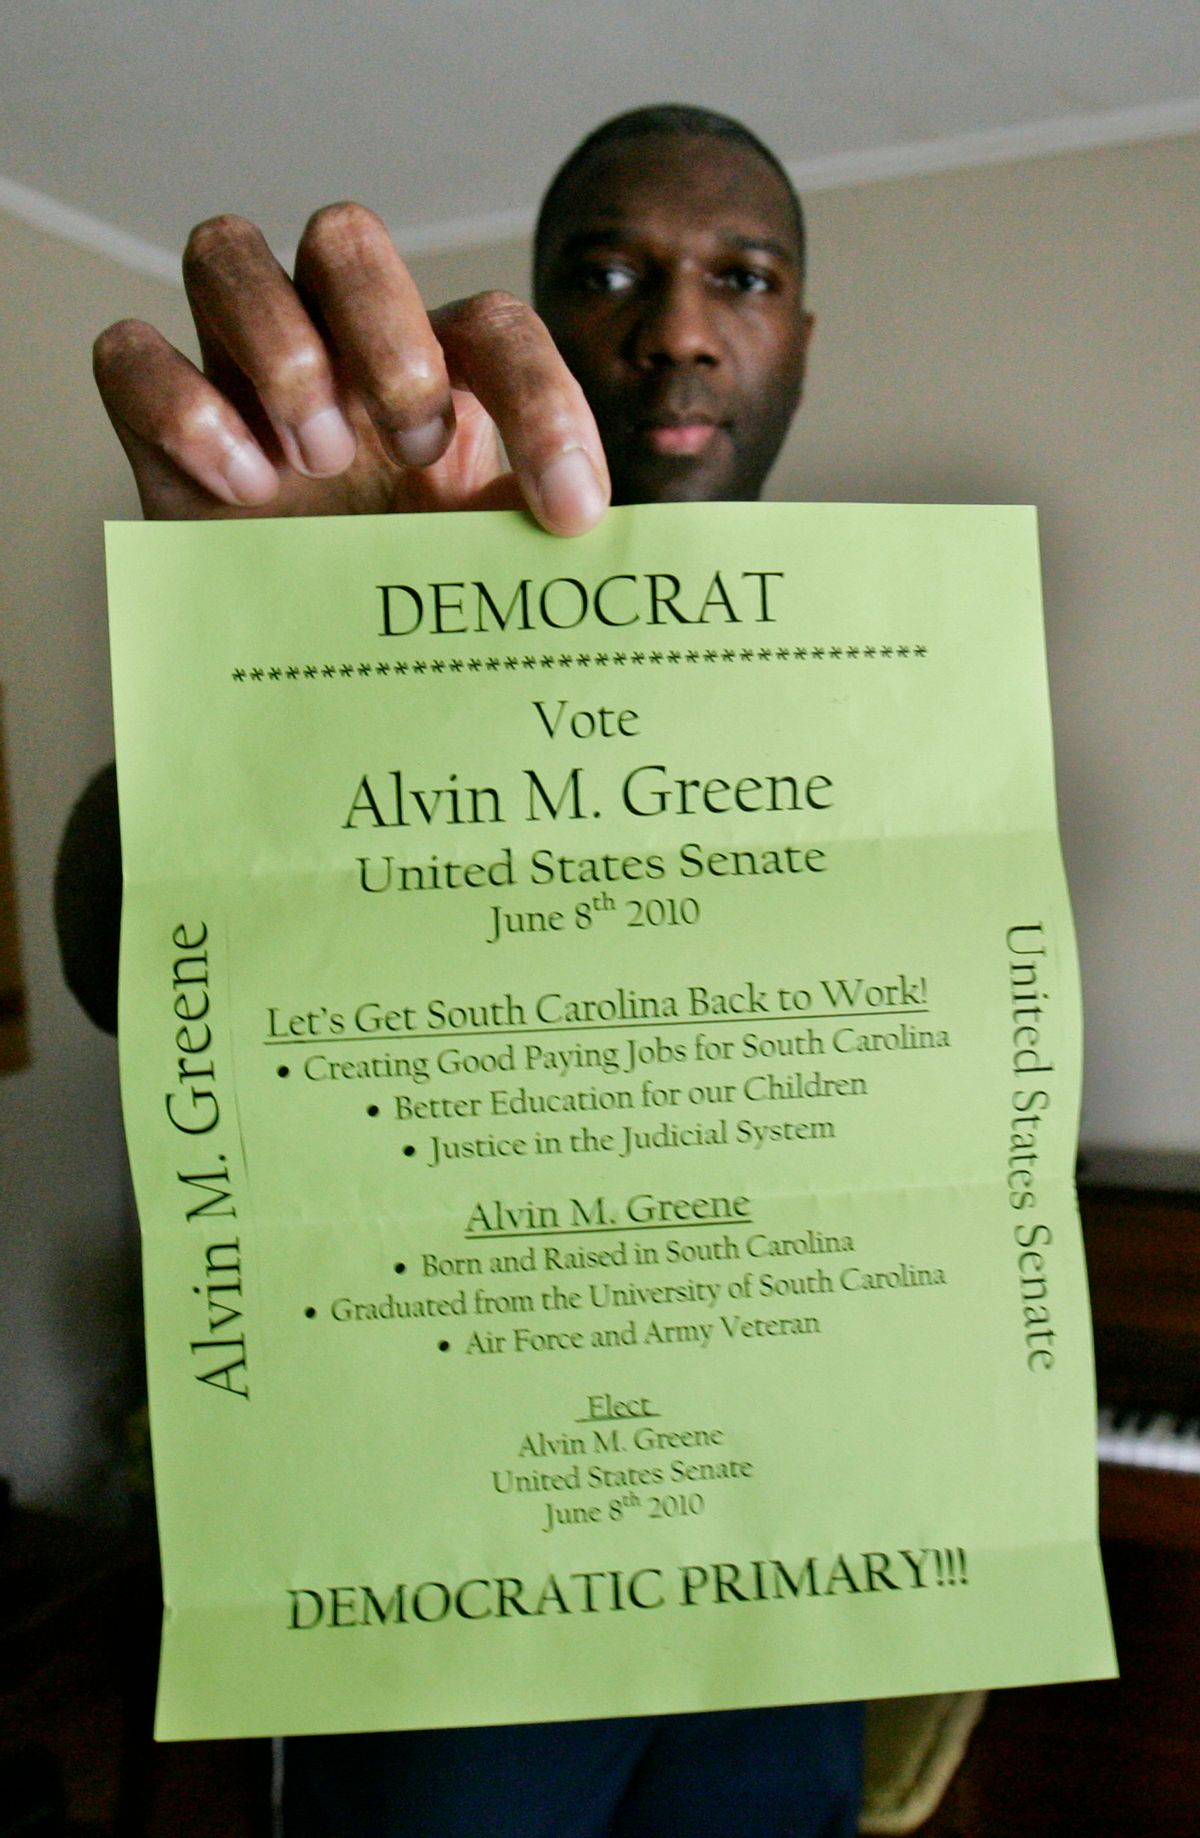 South Carolina Democratic candidate for U.S. Senate, Alvin M Greene, holds his own personal copy of his campaign flyer he used to show people as he campaigned in Manning, S.C. Wednesday, June 9, 2010 after winning the Democratic nomination in yesterday's South Carolina primary elections. Greene  will face incumbent Rep. Sen. Jim DeMint in the November elections.(AP Photo/Mary Ann Chastain) (Mary Ann Chastain)